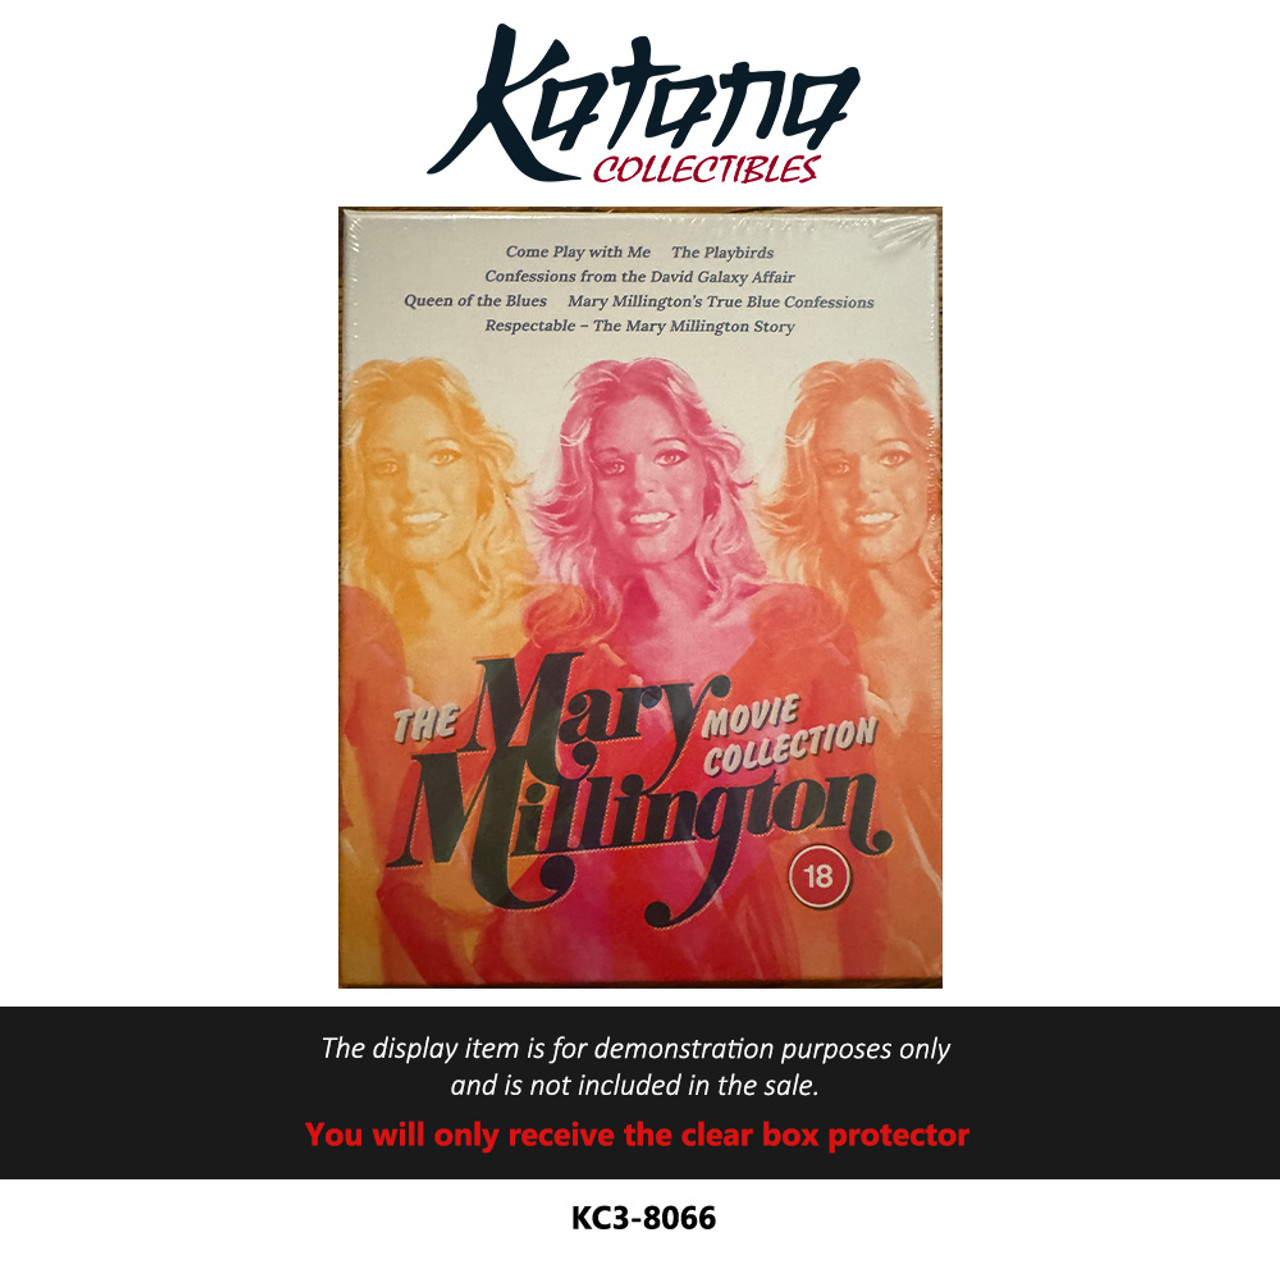 Katana Collectibles Protector For The Mary Millington Movie Collection (1977-2016) | Screenbound Pictures | Limited Edition Box Set